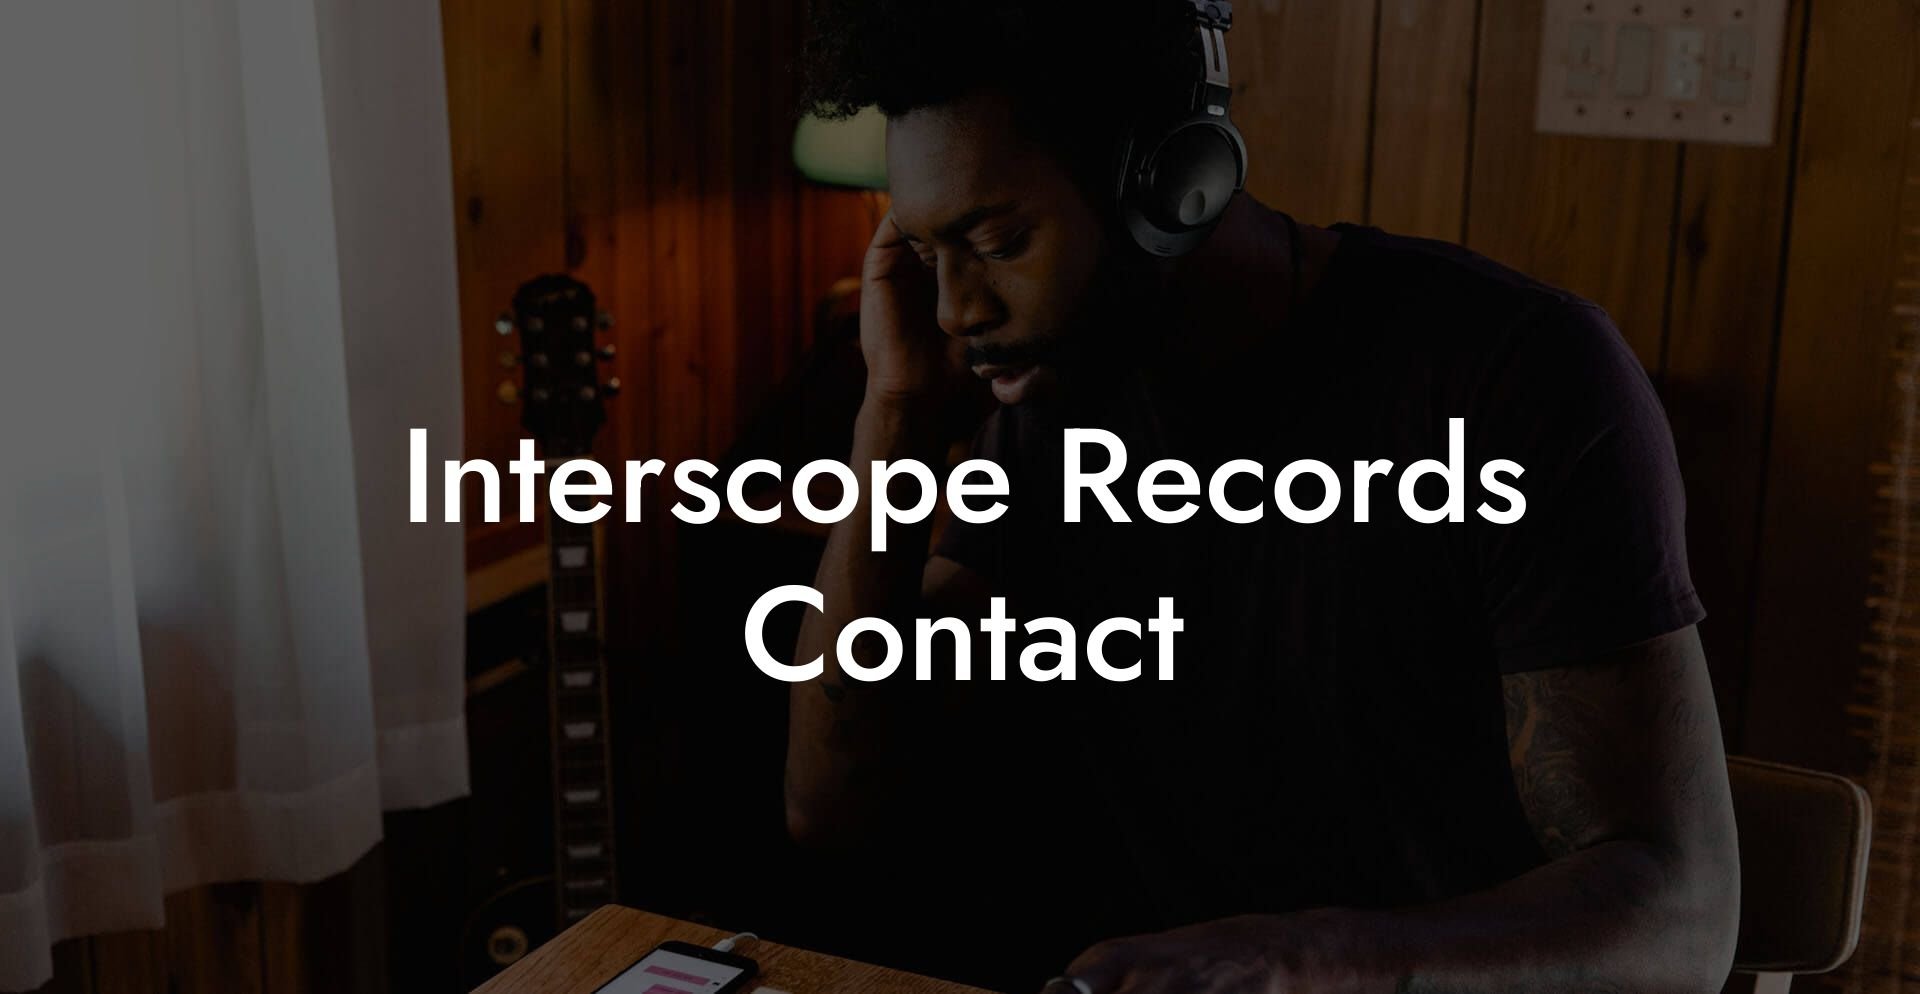 Interscope Records Contact